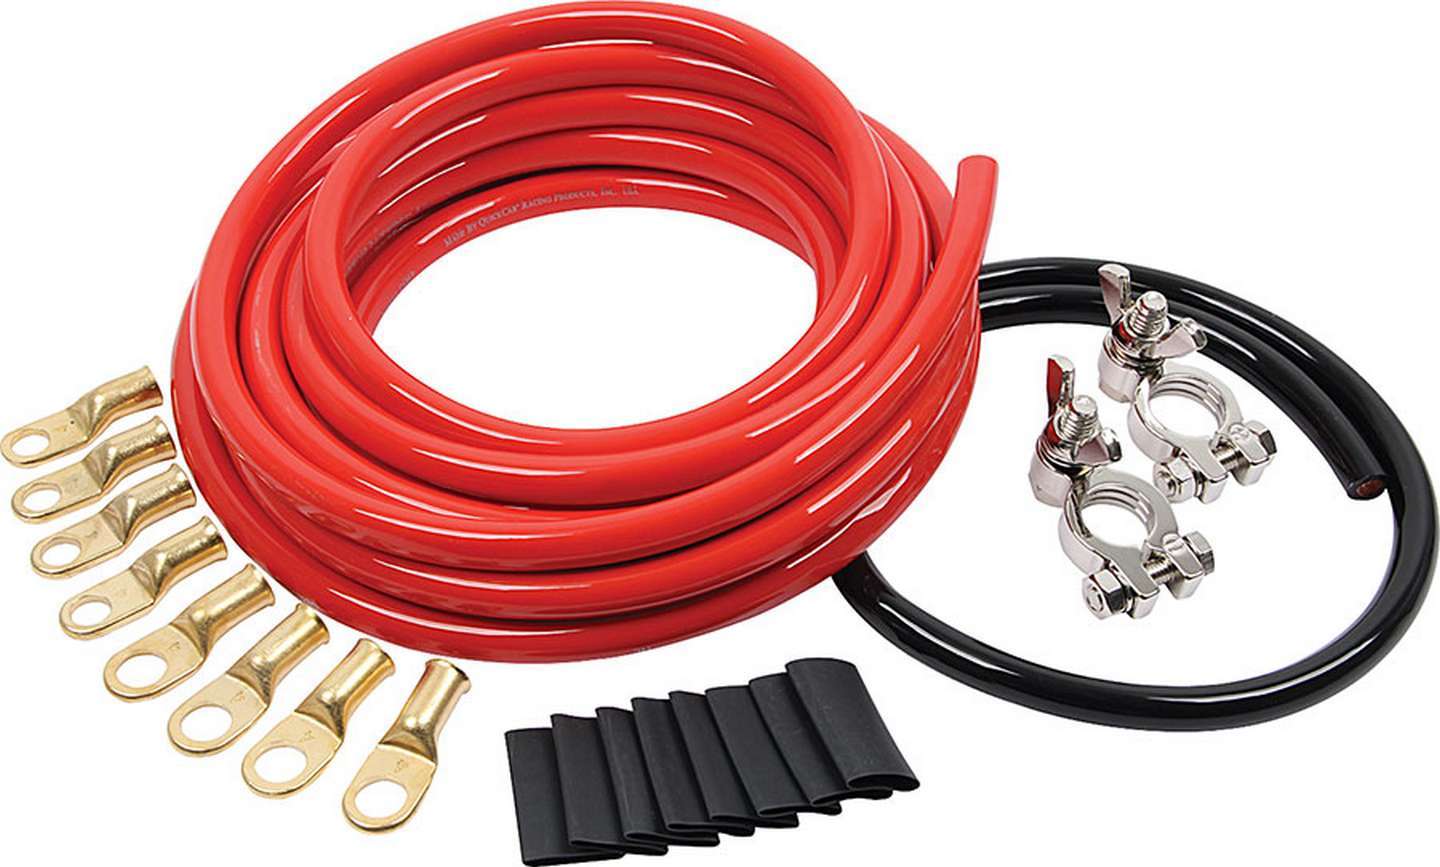 Allstar Performance 76114 Battery Cable Kit, 4 Gauge, Top Mount Battery Terminals, Terminals / Heat Shrink Included, Copper, 15 ft Red / 2 ft Black, Kit